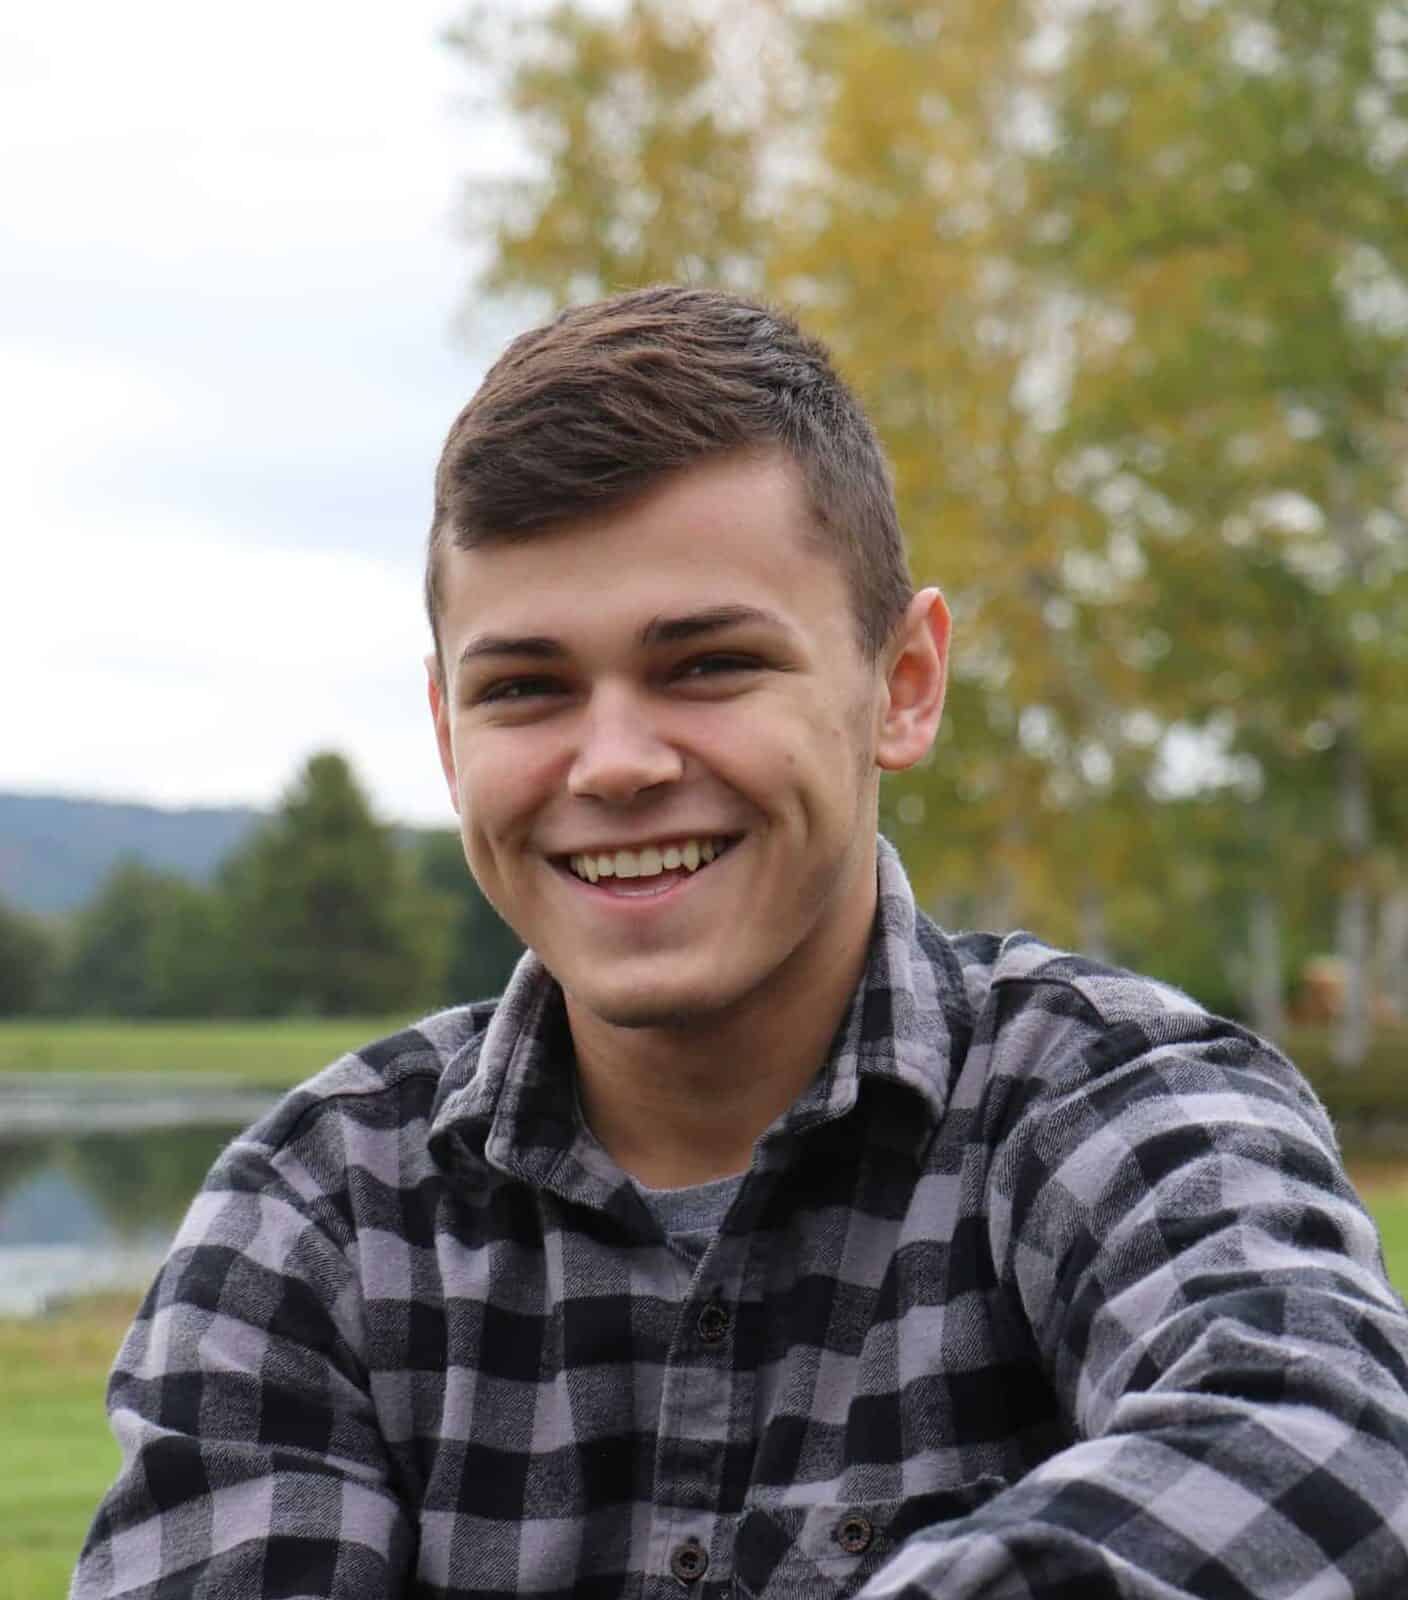 A photo of a young man smiling at the camera wearing a flannel shirt.